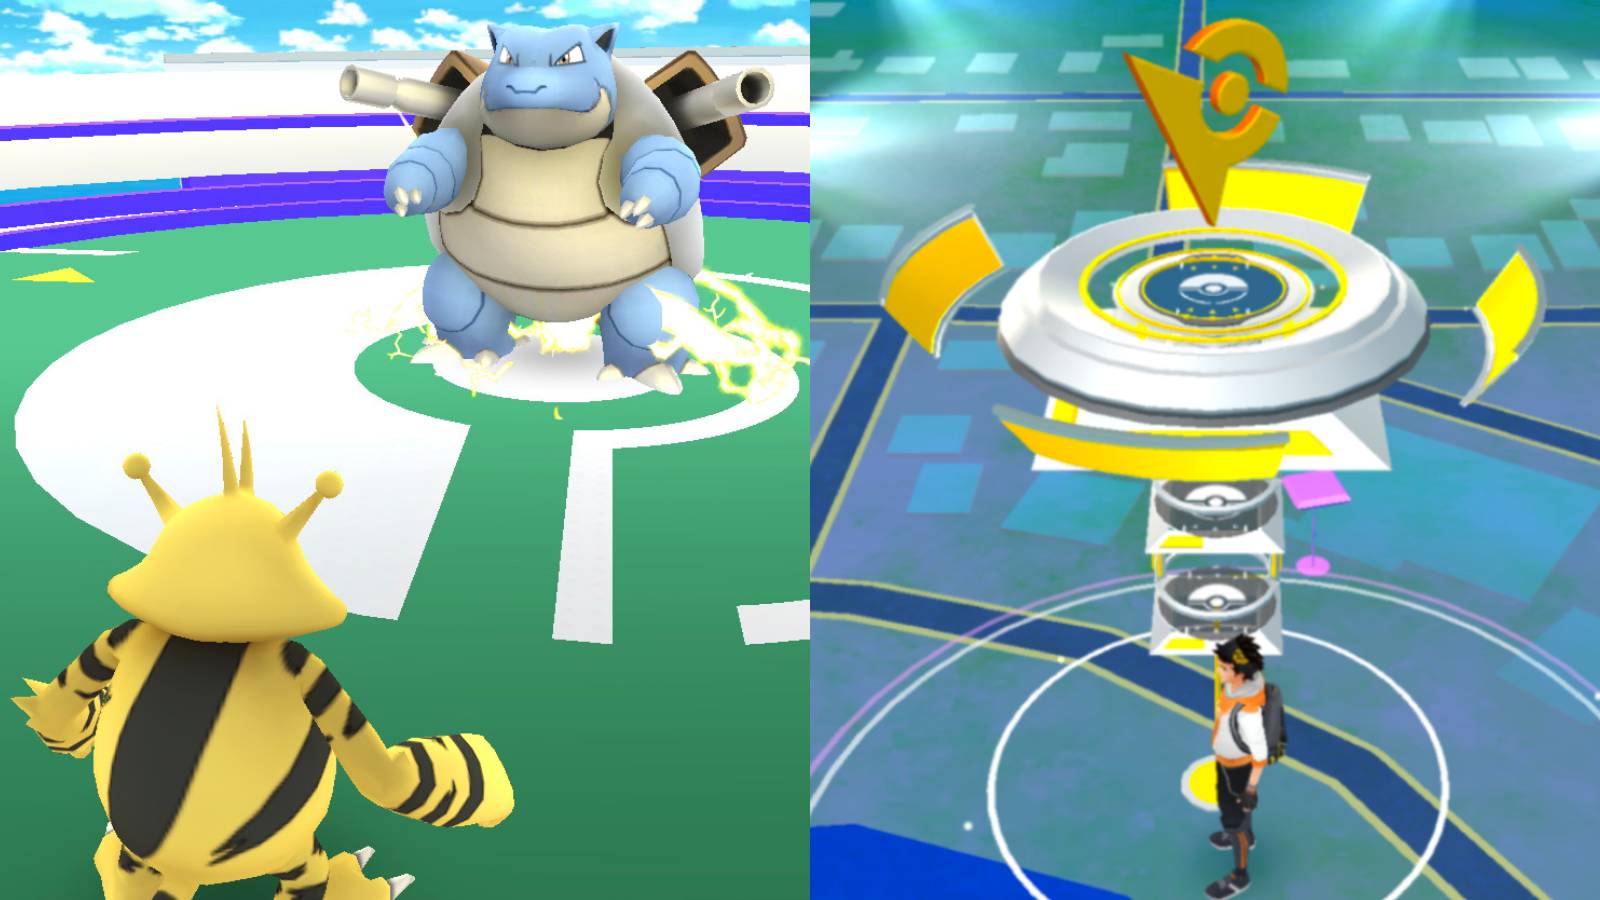 Pokemon Go players want changes to “stale and frustrating” Gym system -  Dexerto